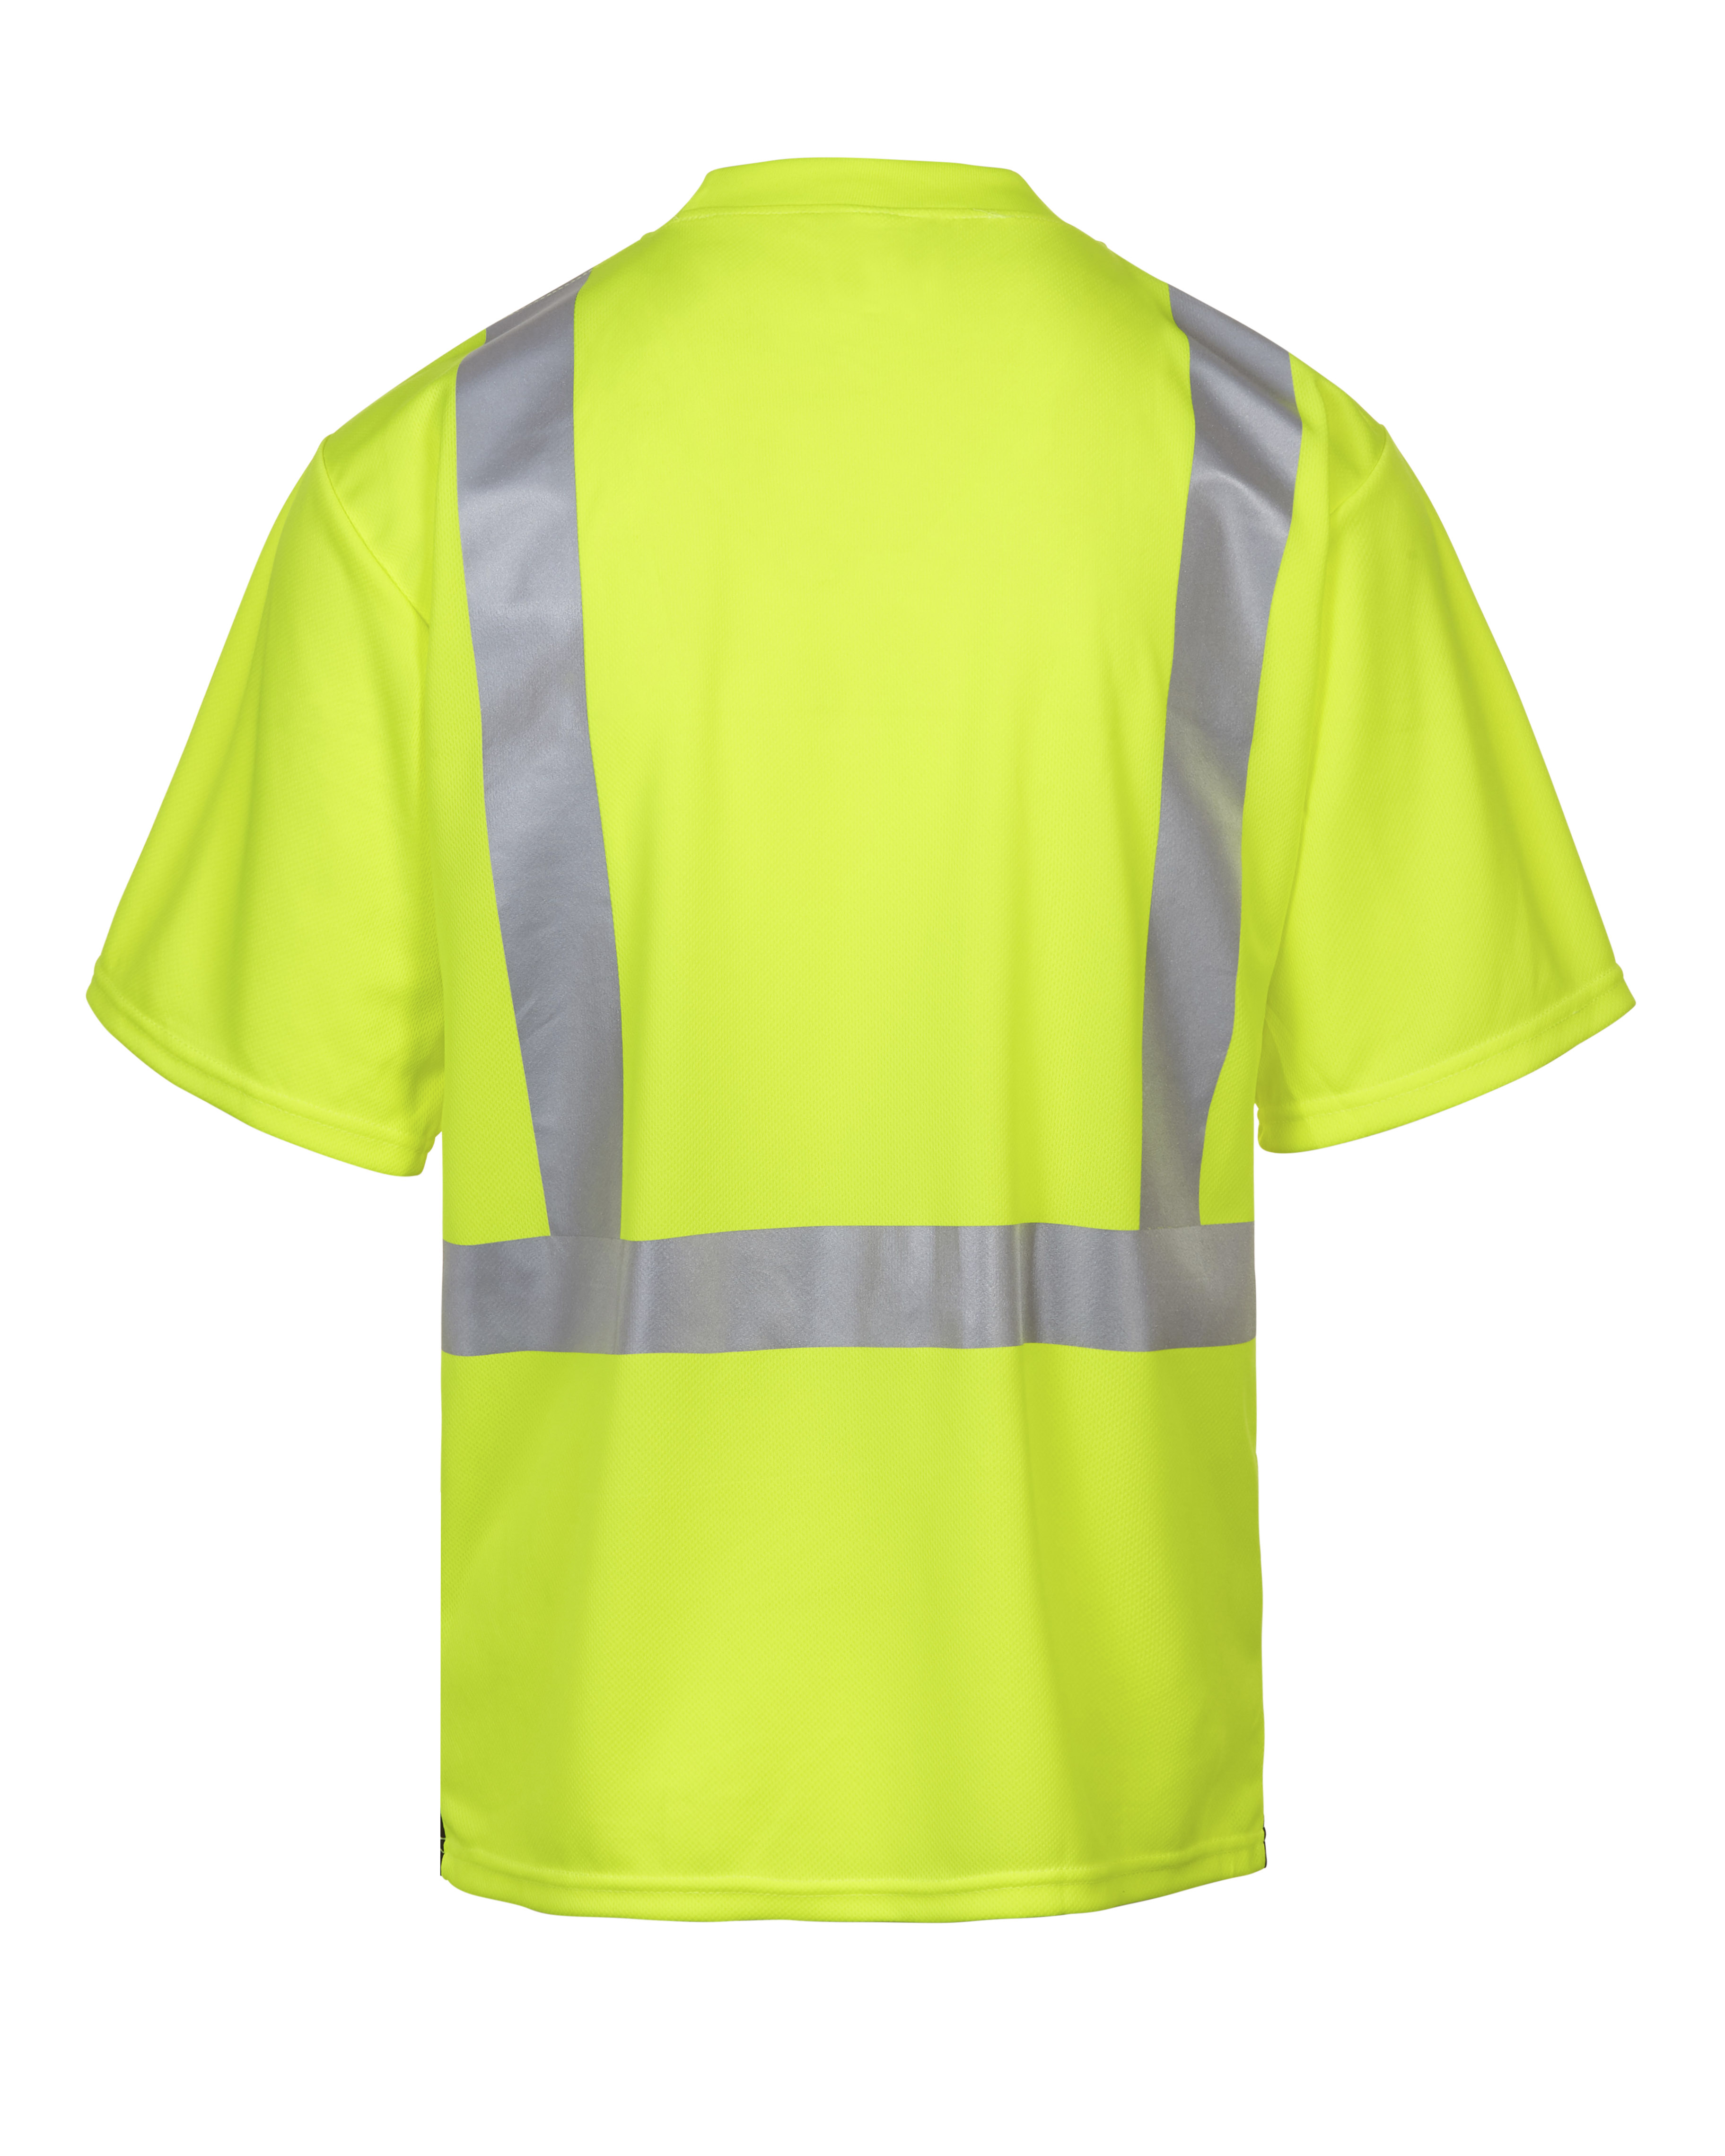 Picture of Max Apparel MAX405 Class 2 T-shirt, Safety Green/Black Bottom